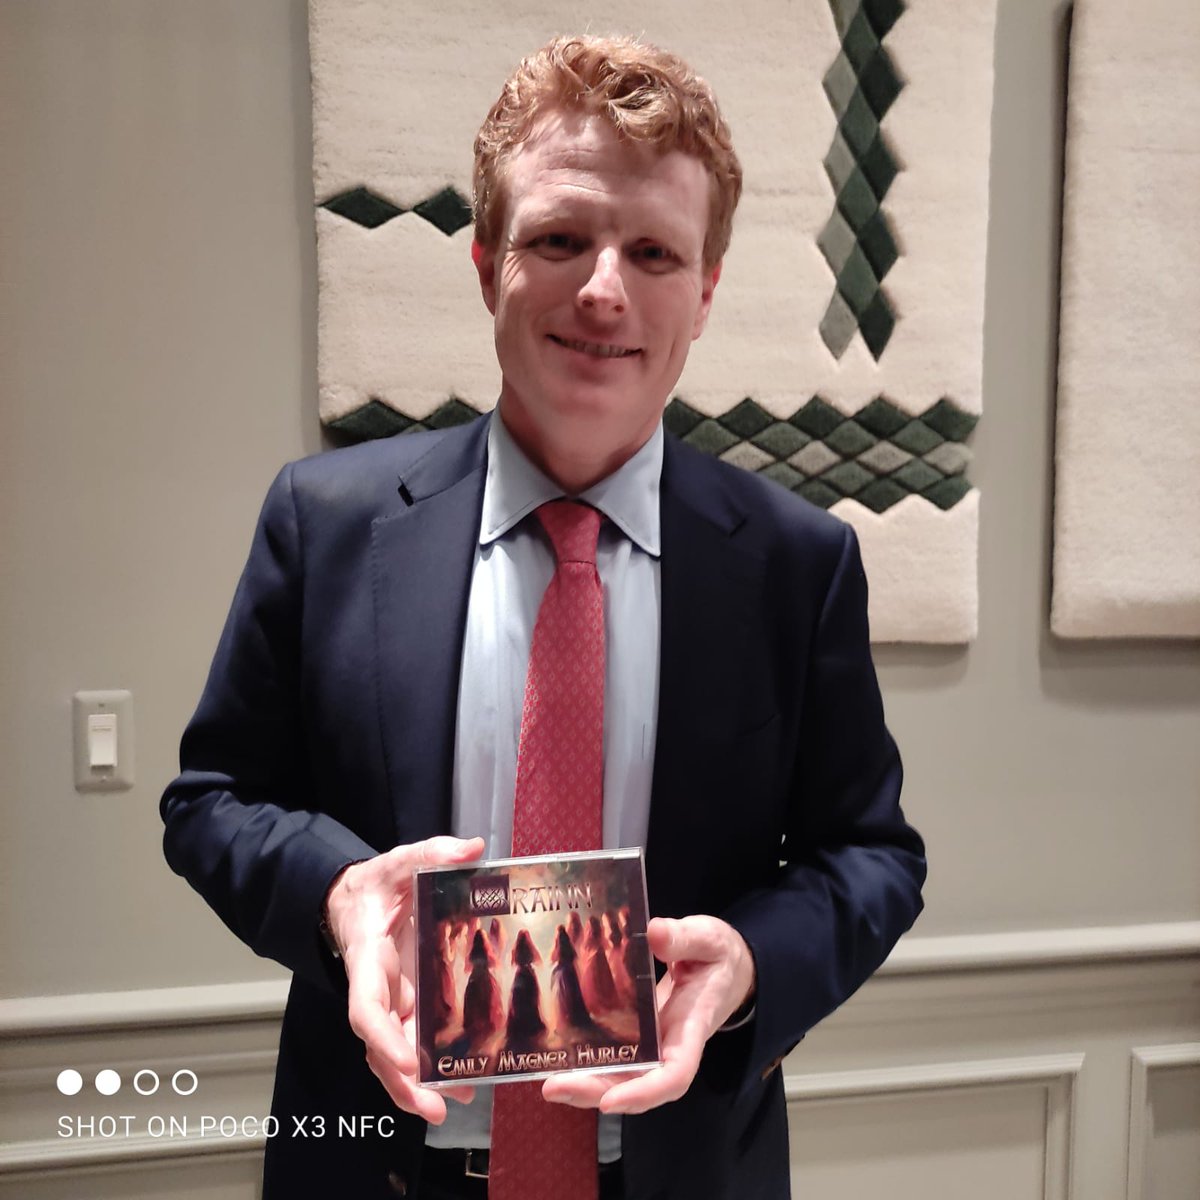 It was a pleasure presenting a copy of my new album 'Orainn' to Joseph Kennedy III which was crafted less than 10 miles from the home of his great great great grandmother, Margaret Field! @USEmbassyDublin @brianod_news #irishmusic #singer #newmusic @IrelandEmbUSA